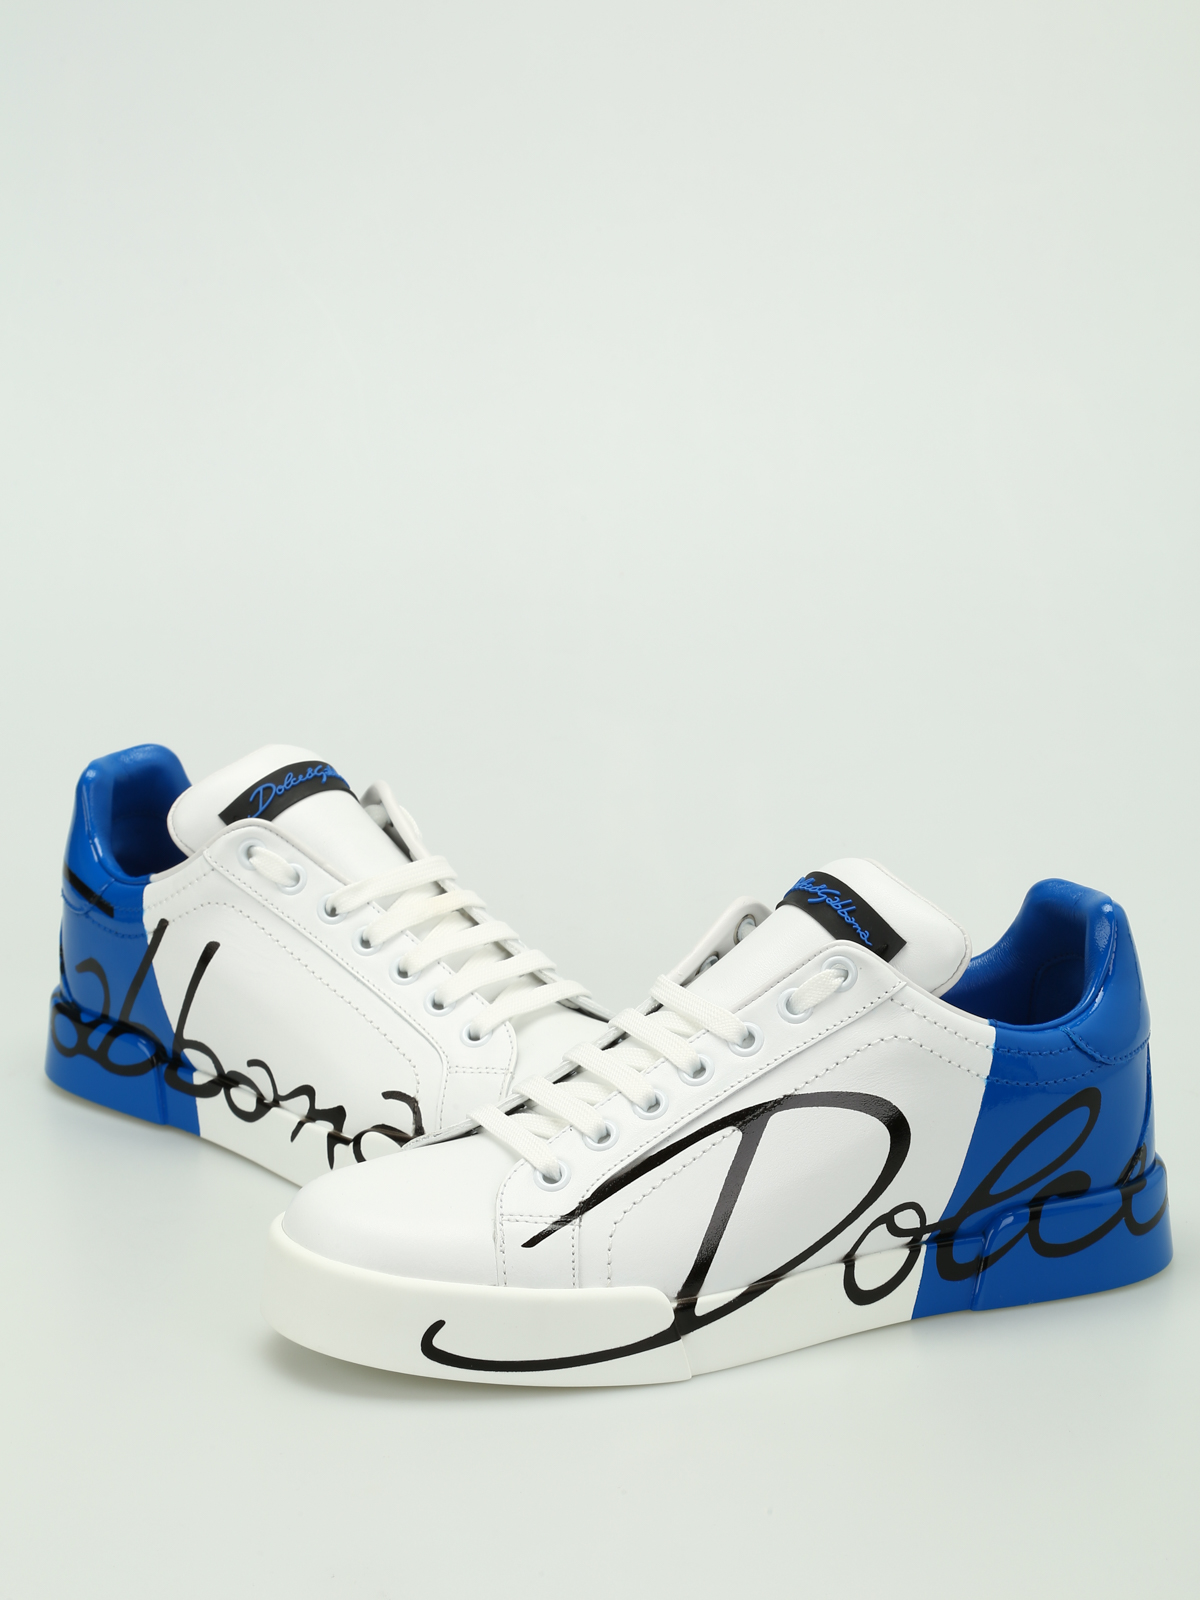 dolce and gabbana blue trainers